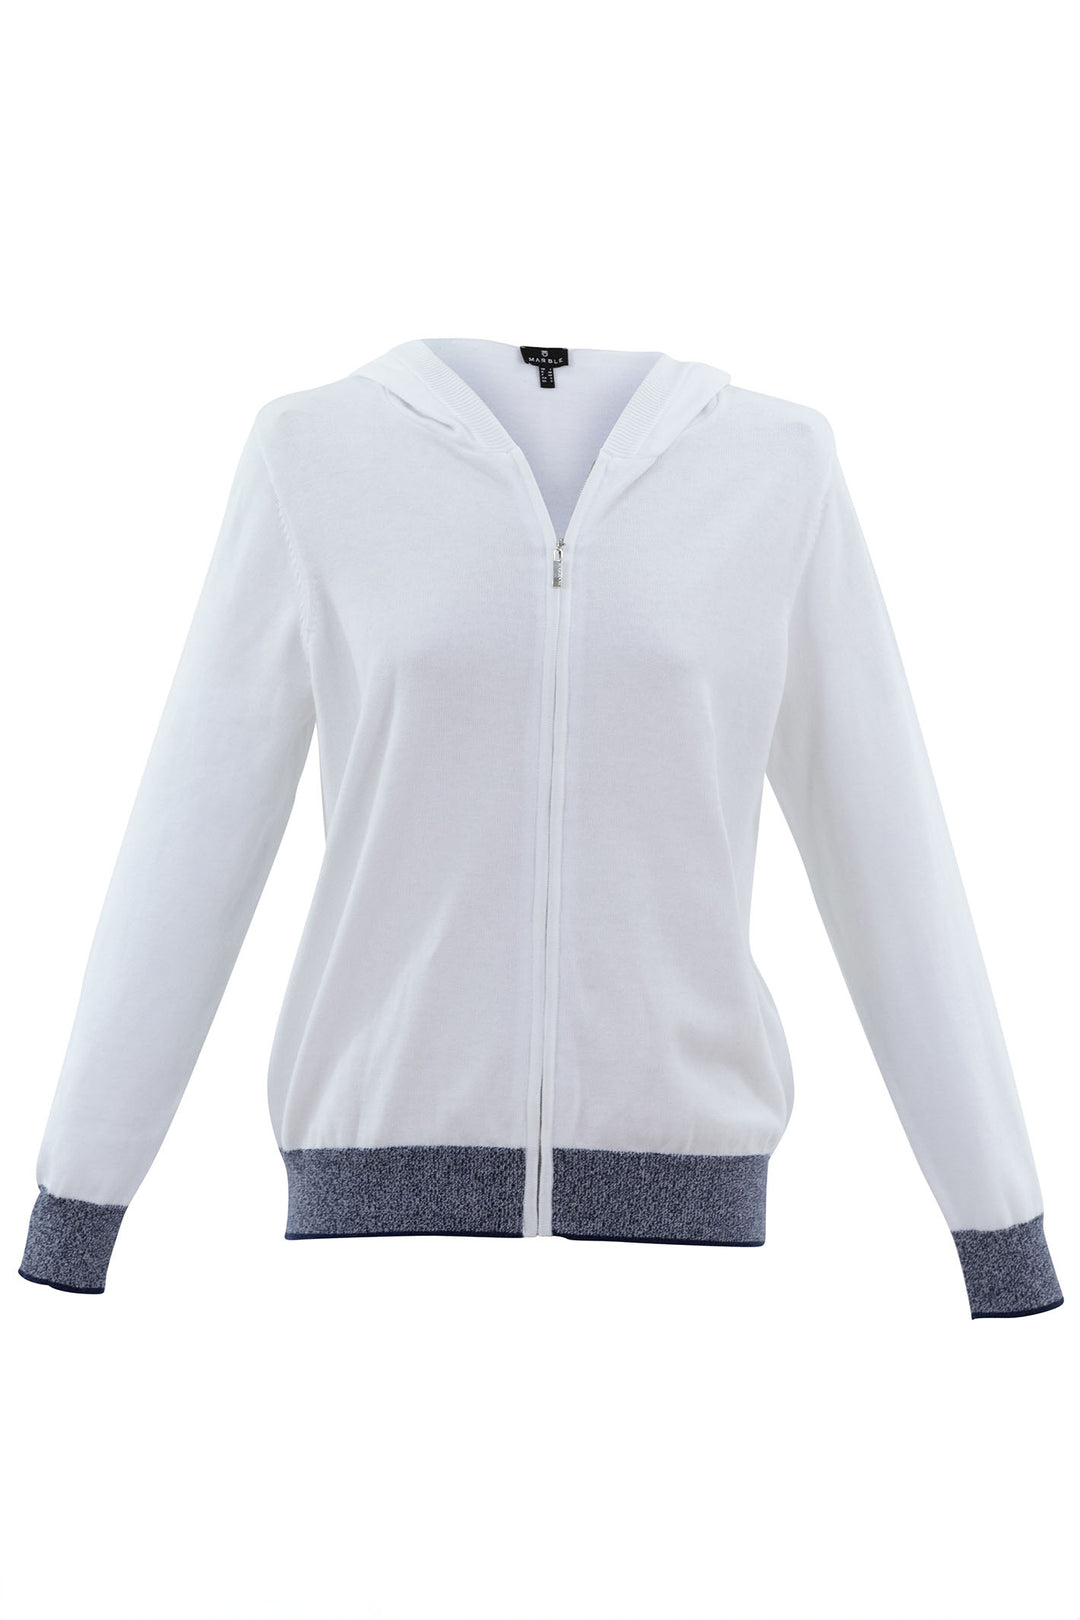 Marble Fashions 7440 102 White Zip Front Hooded Cardigan - Experience Boutique